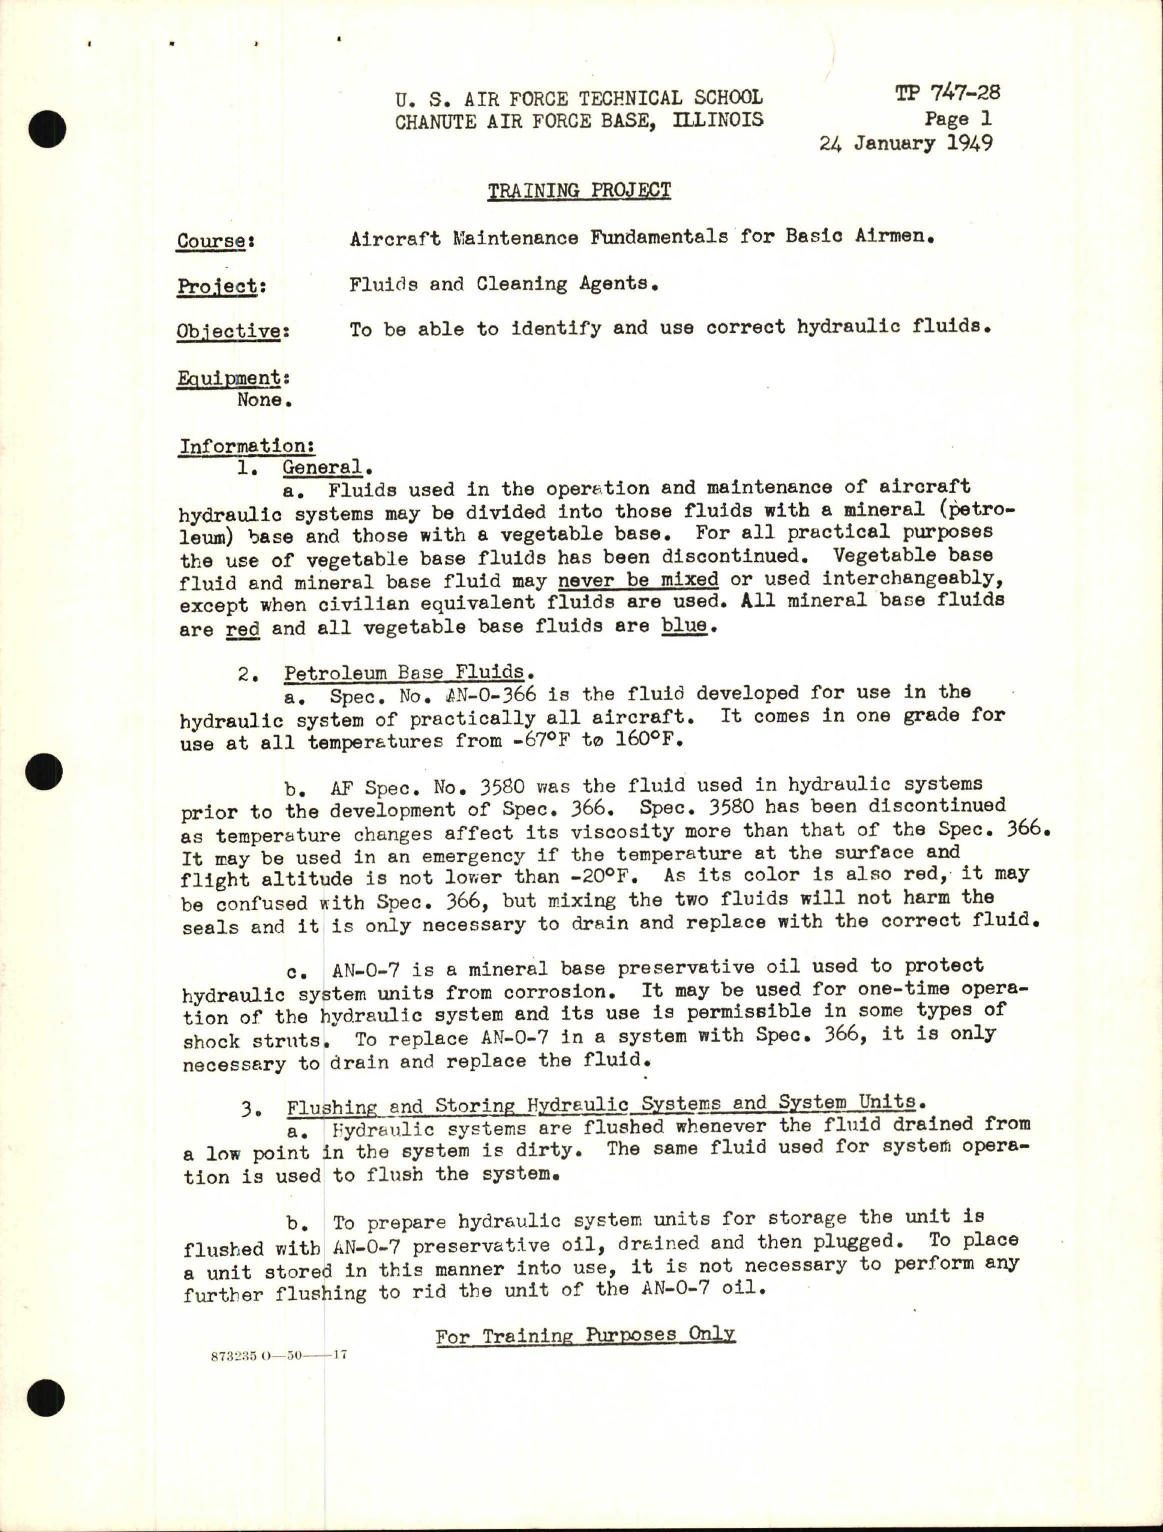 Sample page 1 from AirCorps Library document: Training Project, Fluids and Cleaning Agents